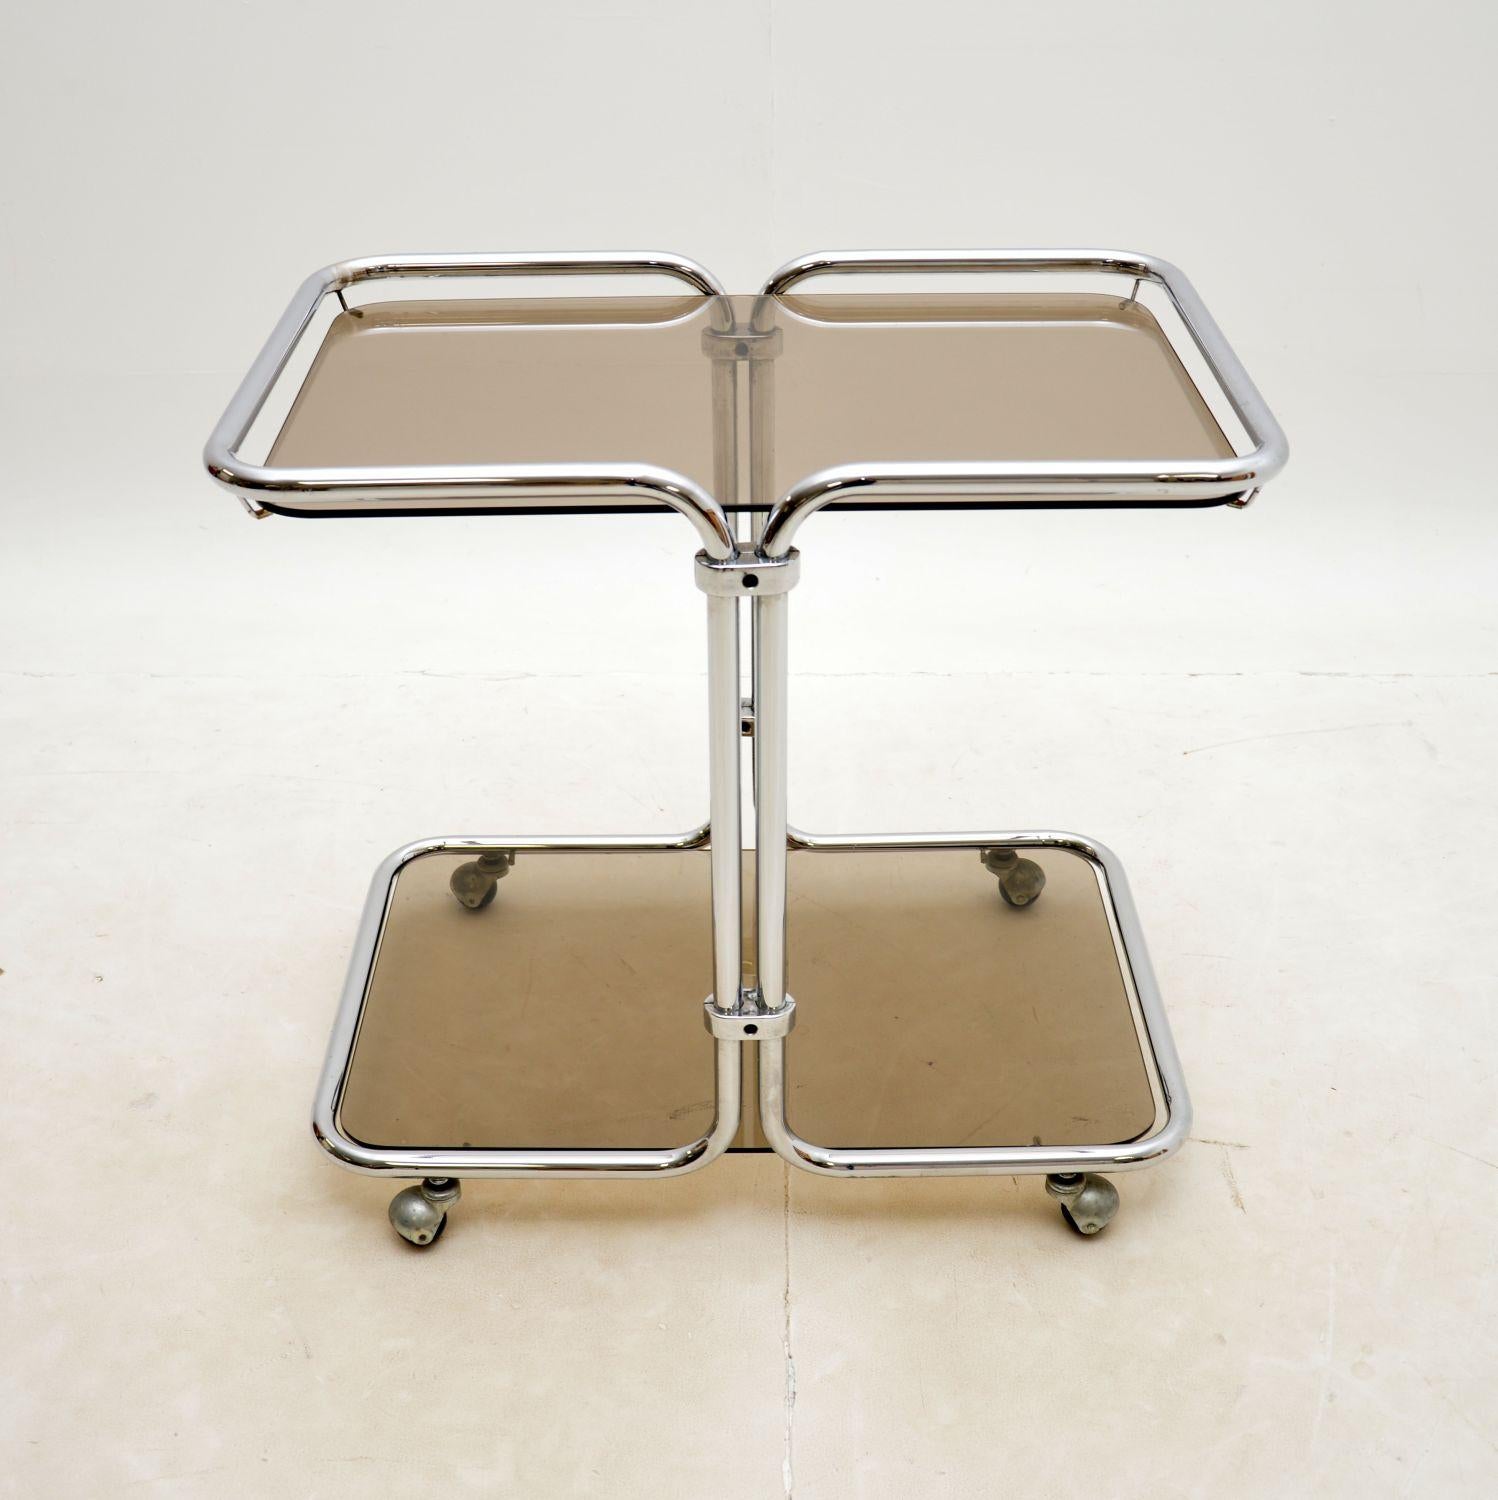 A very stylish and well-made vintage drinks trolley in tubular steel and glass. This was made in England, it dates from the 1970s.
It is of lovely quality and has a useful design. The top and lower tiers splay out from a central column base. This